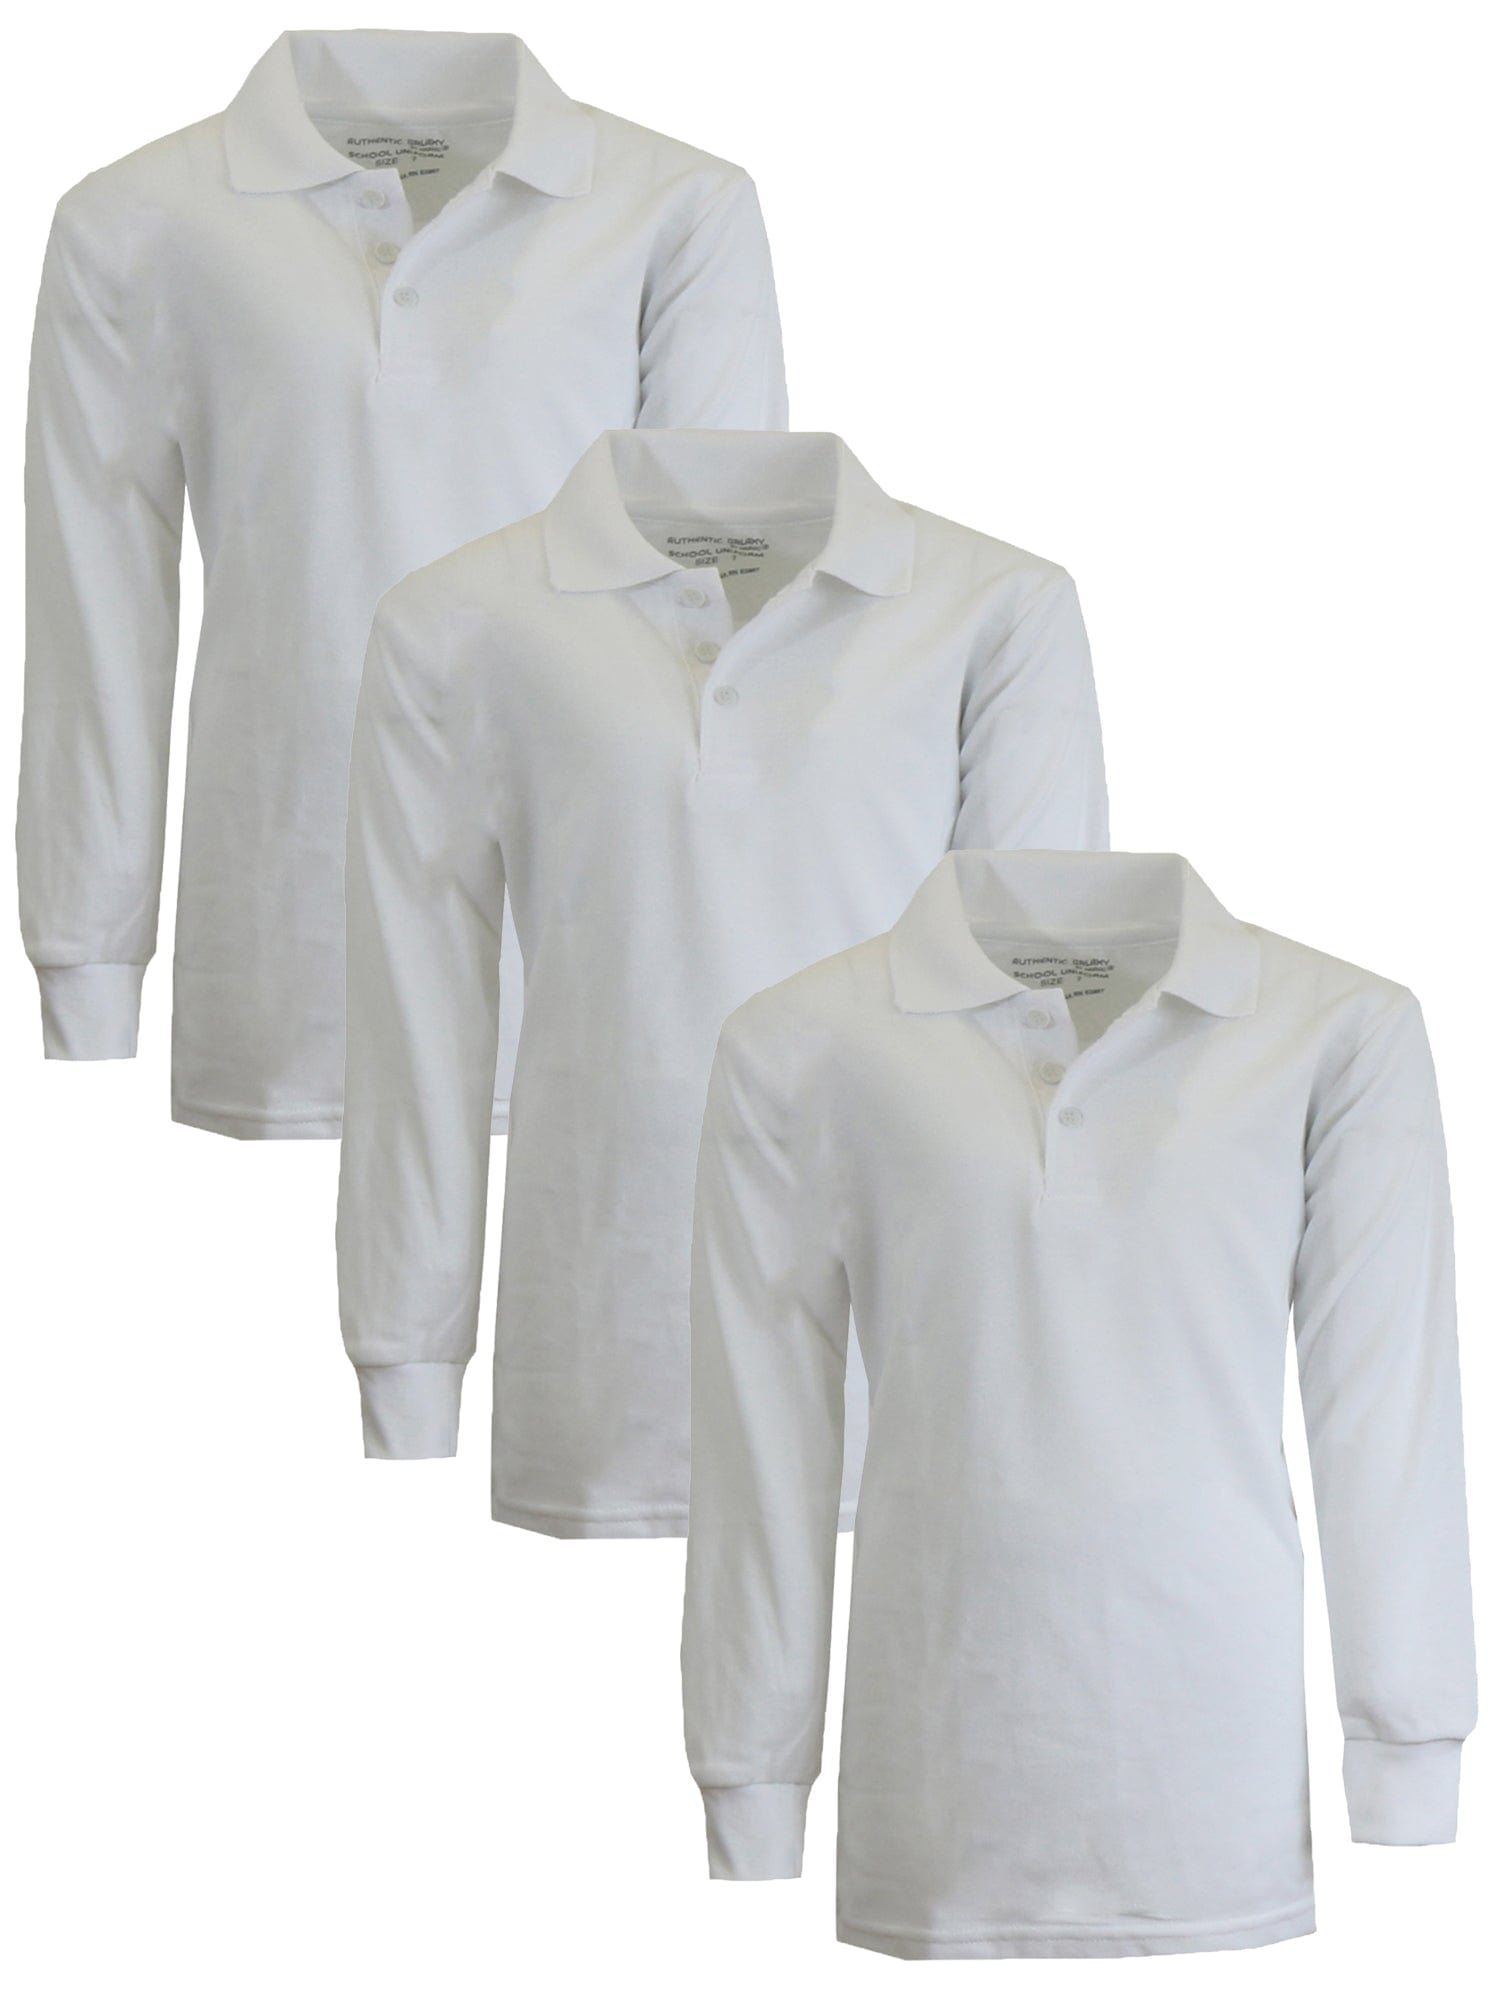 Boy's (3-PACK) Long Sleeve Pique Polo Shirt - (Sizes 4-20) - GalaxybyHarvic